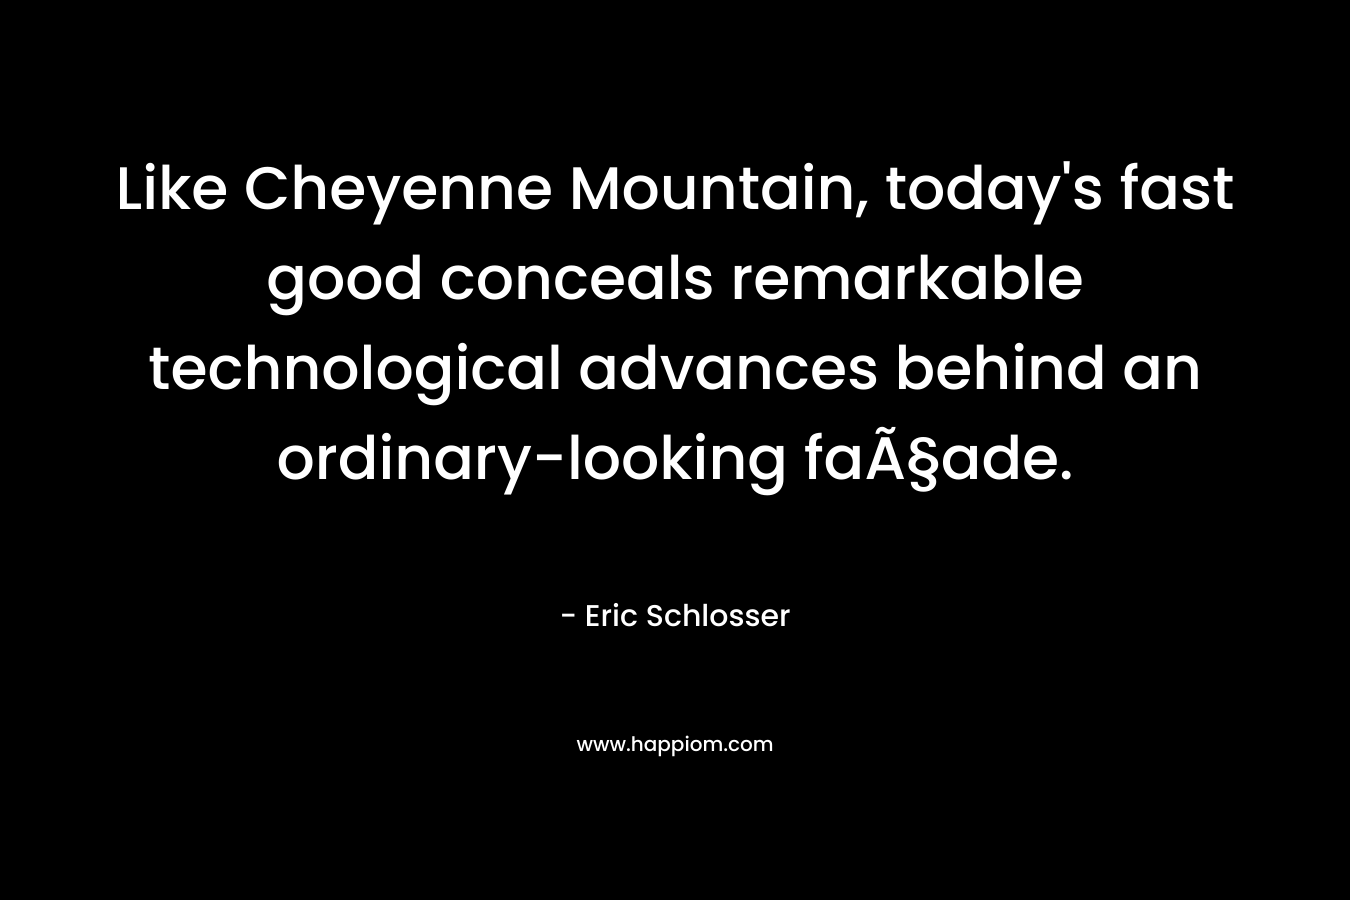 Like Cheyenne Mountain, today’s fast good conceals remarkable technological advances behind an ordinary-looking faÃ§ade. – Eric Schlosser